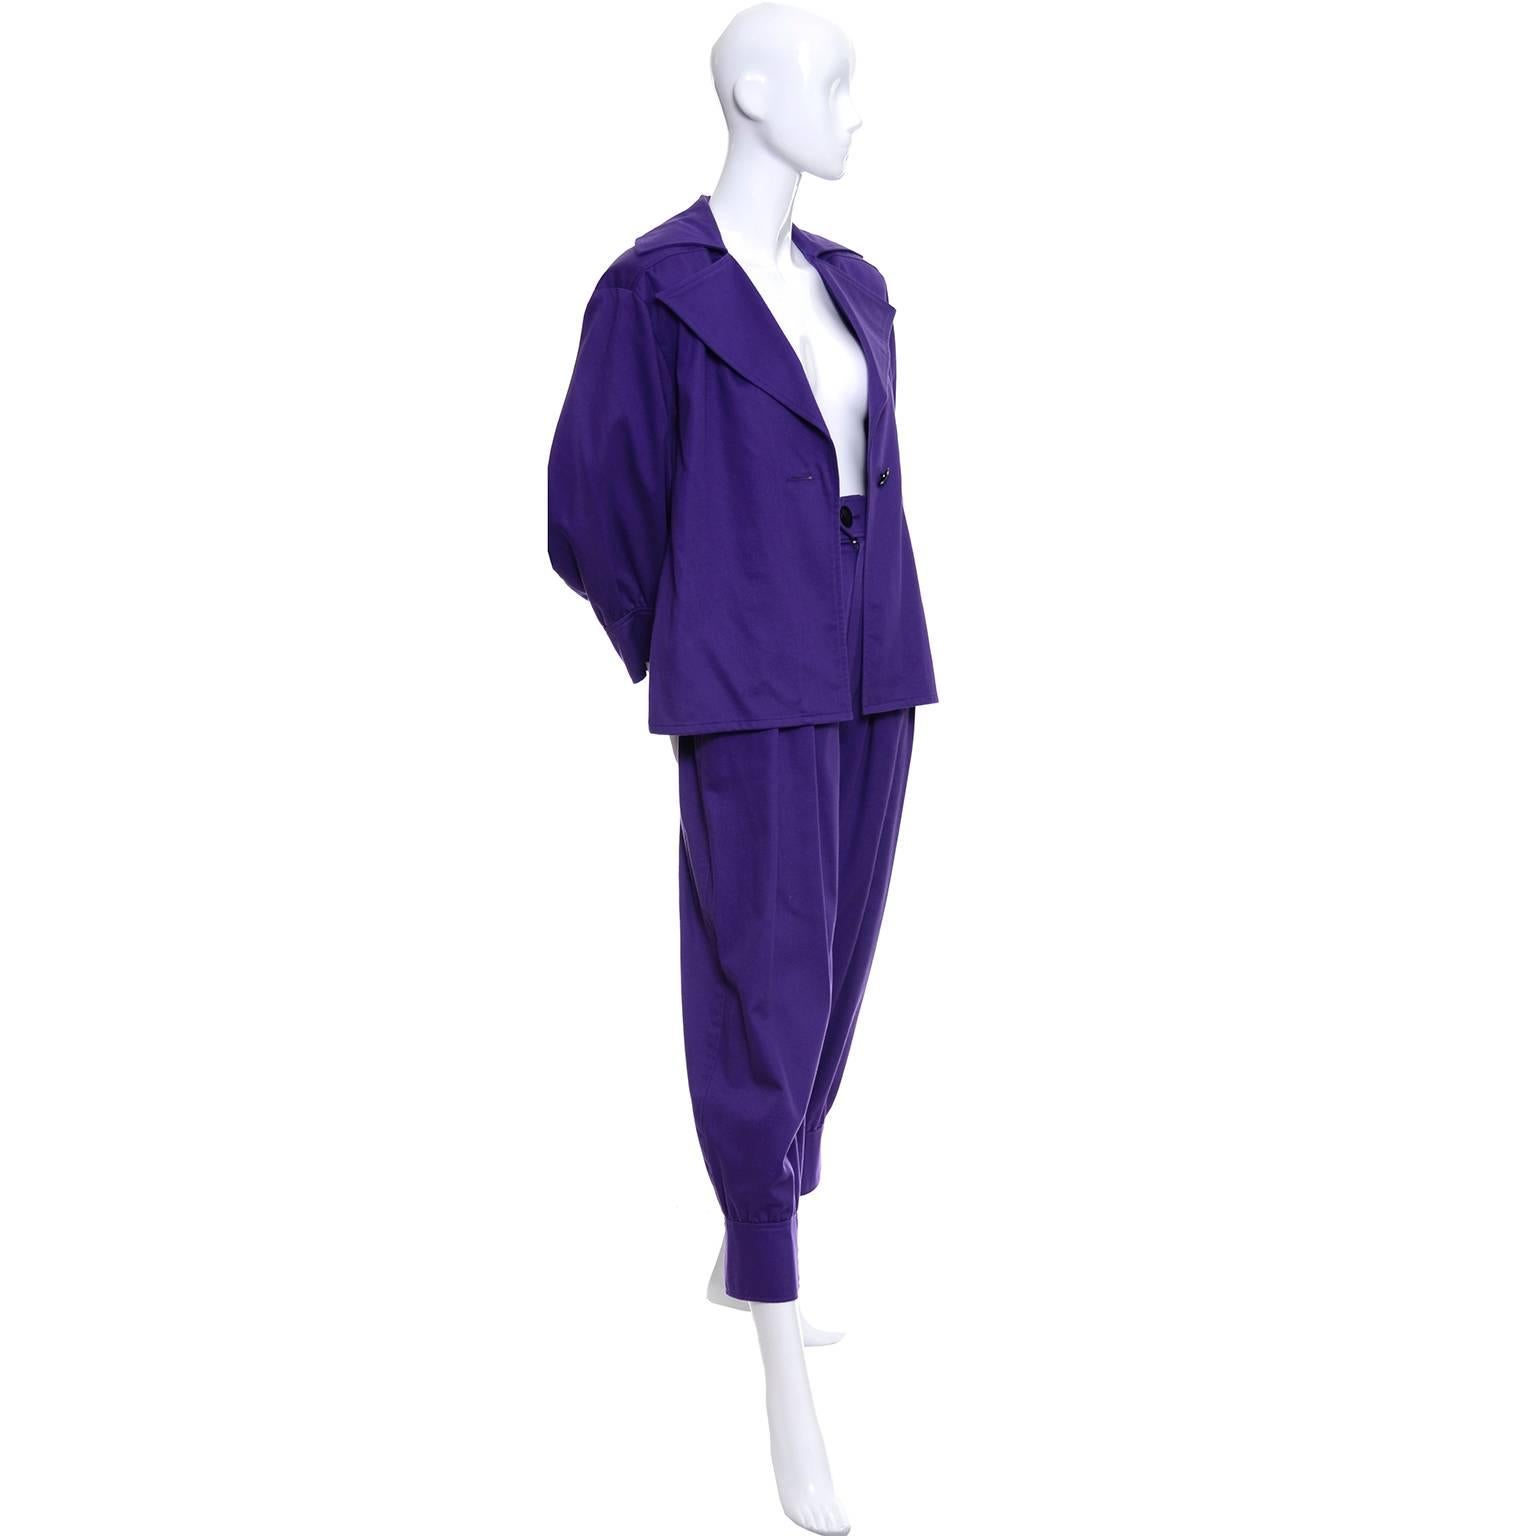 This is a fabulous purple cotton 2 piece vintage outfit from YSL with a puffy long slightly off shoulder peasant sleeves jacket/top, and a pair of knickerbocker style pants.  The pants have side slit pockets and a front zipper, and the jacket has a